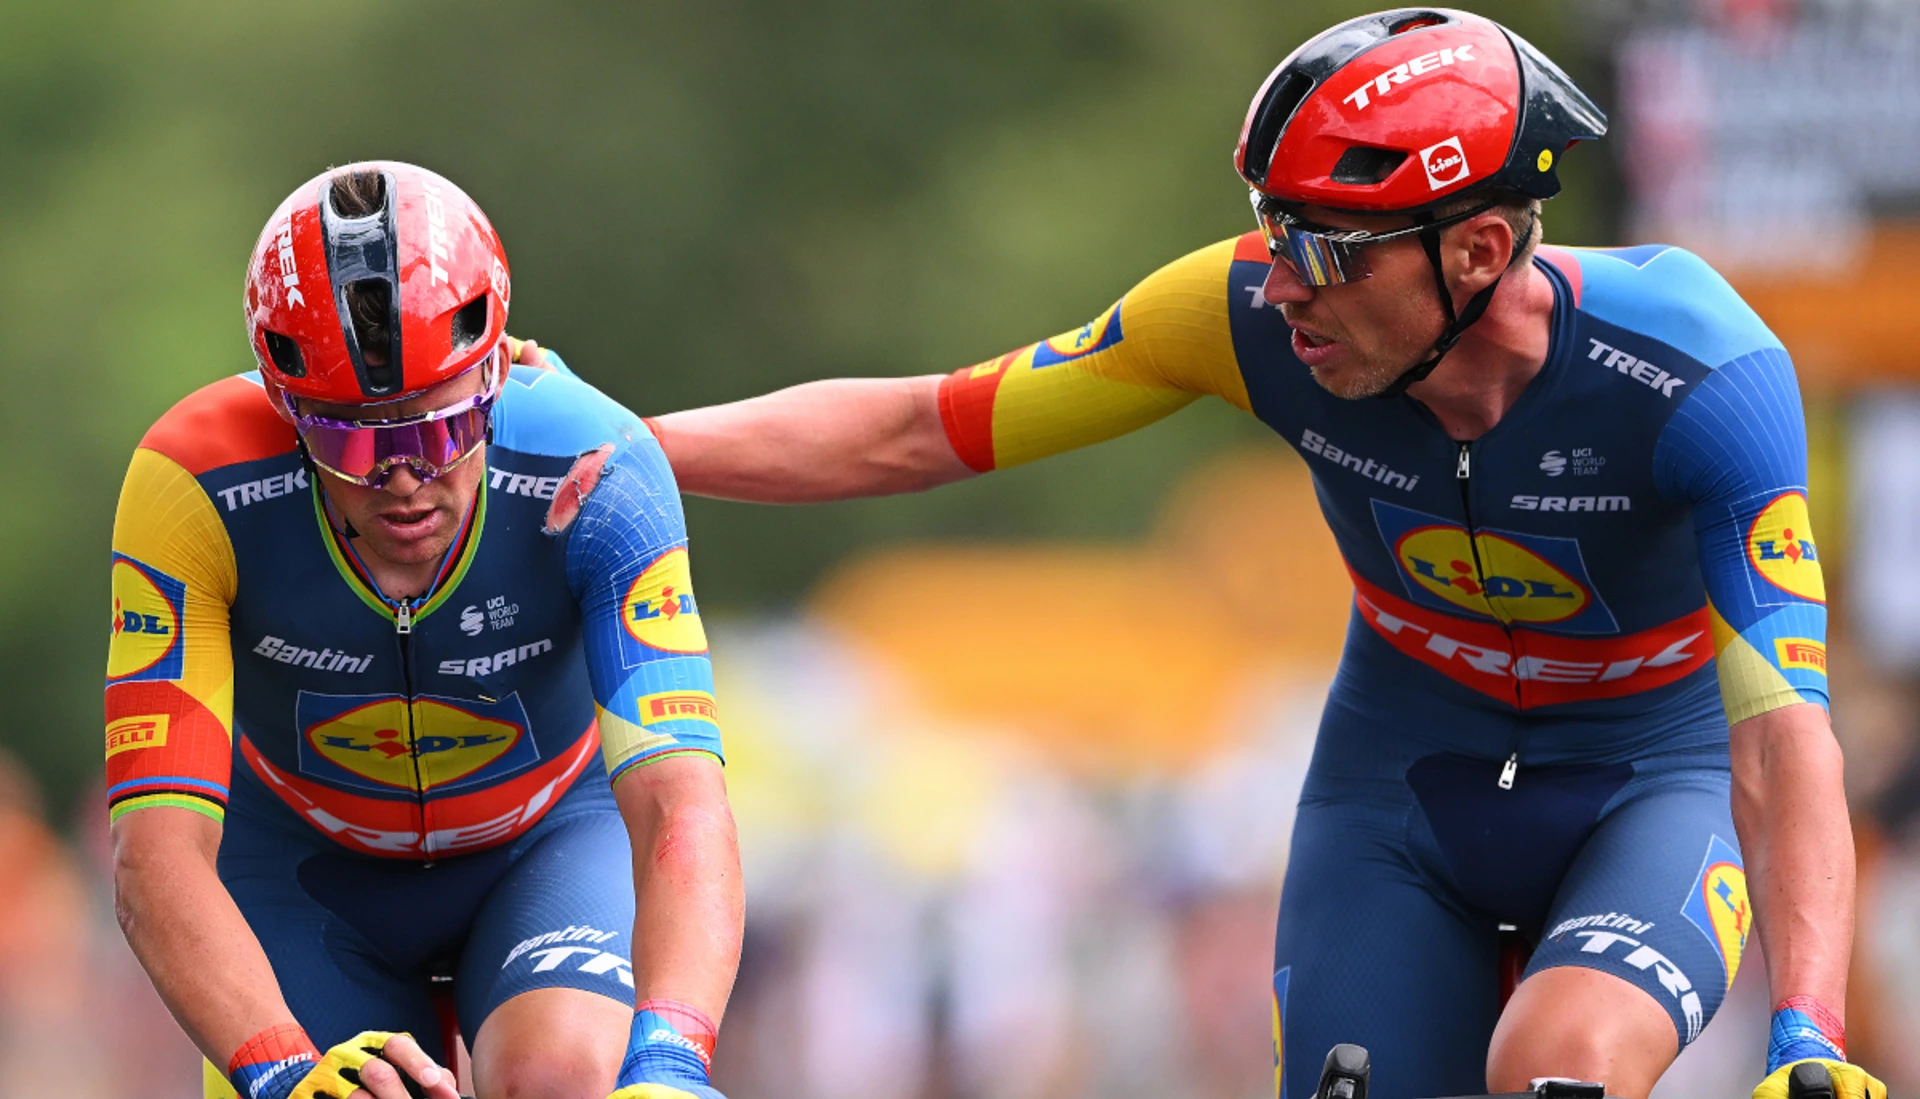 Olympic hope Pedersen pulls out of Tour de France